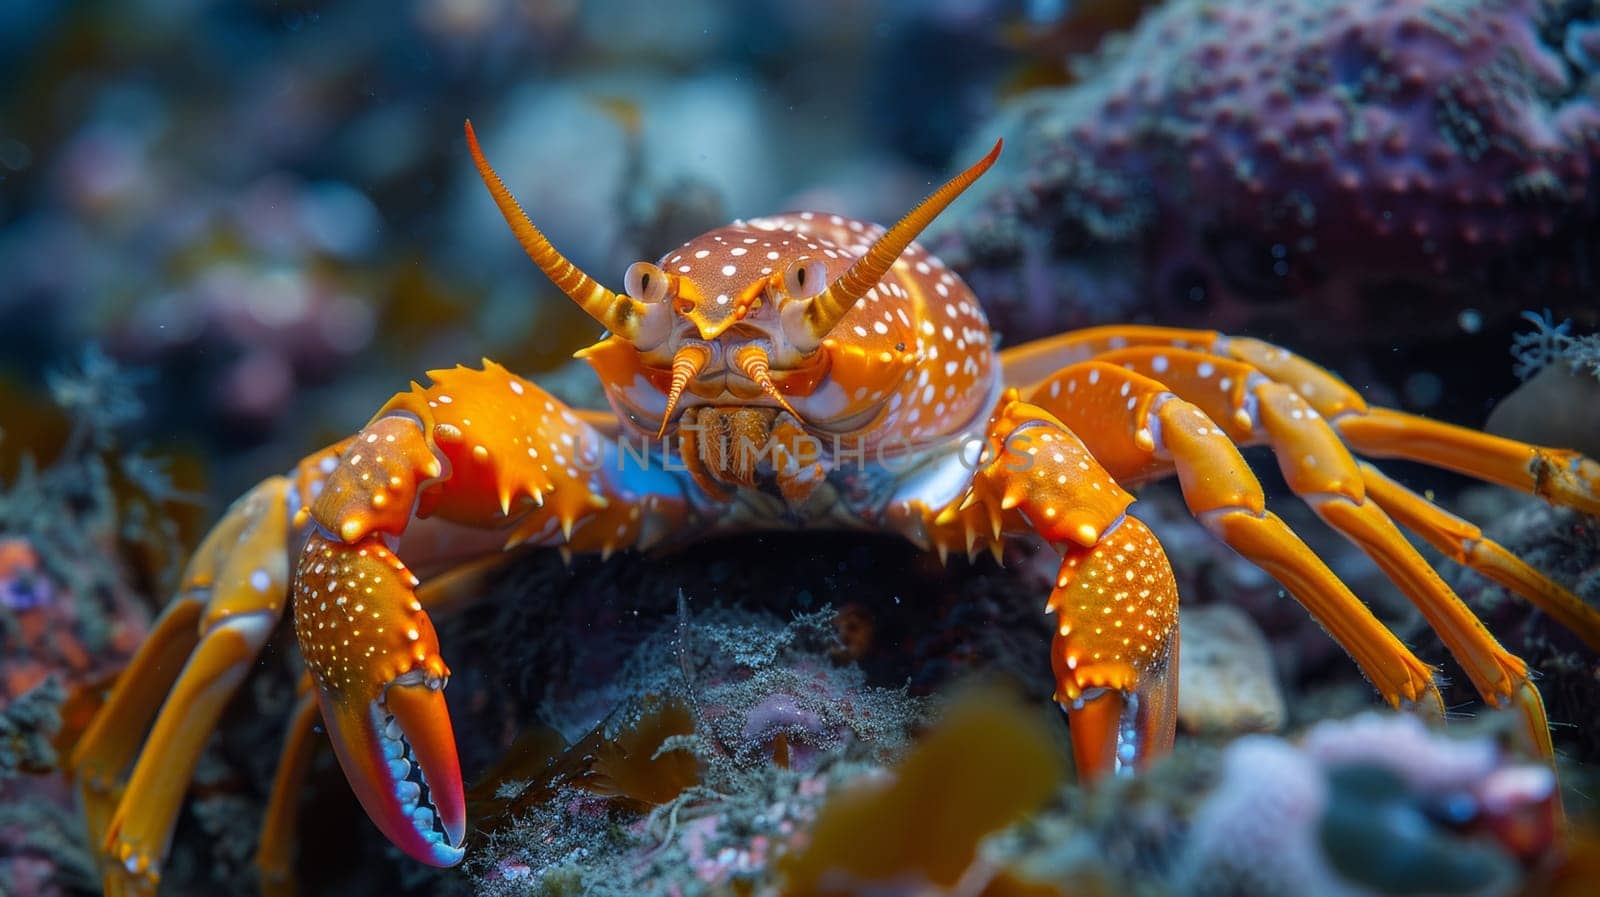 A crab with orange and yellow spots on its body is sitting in the water